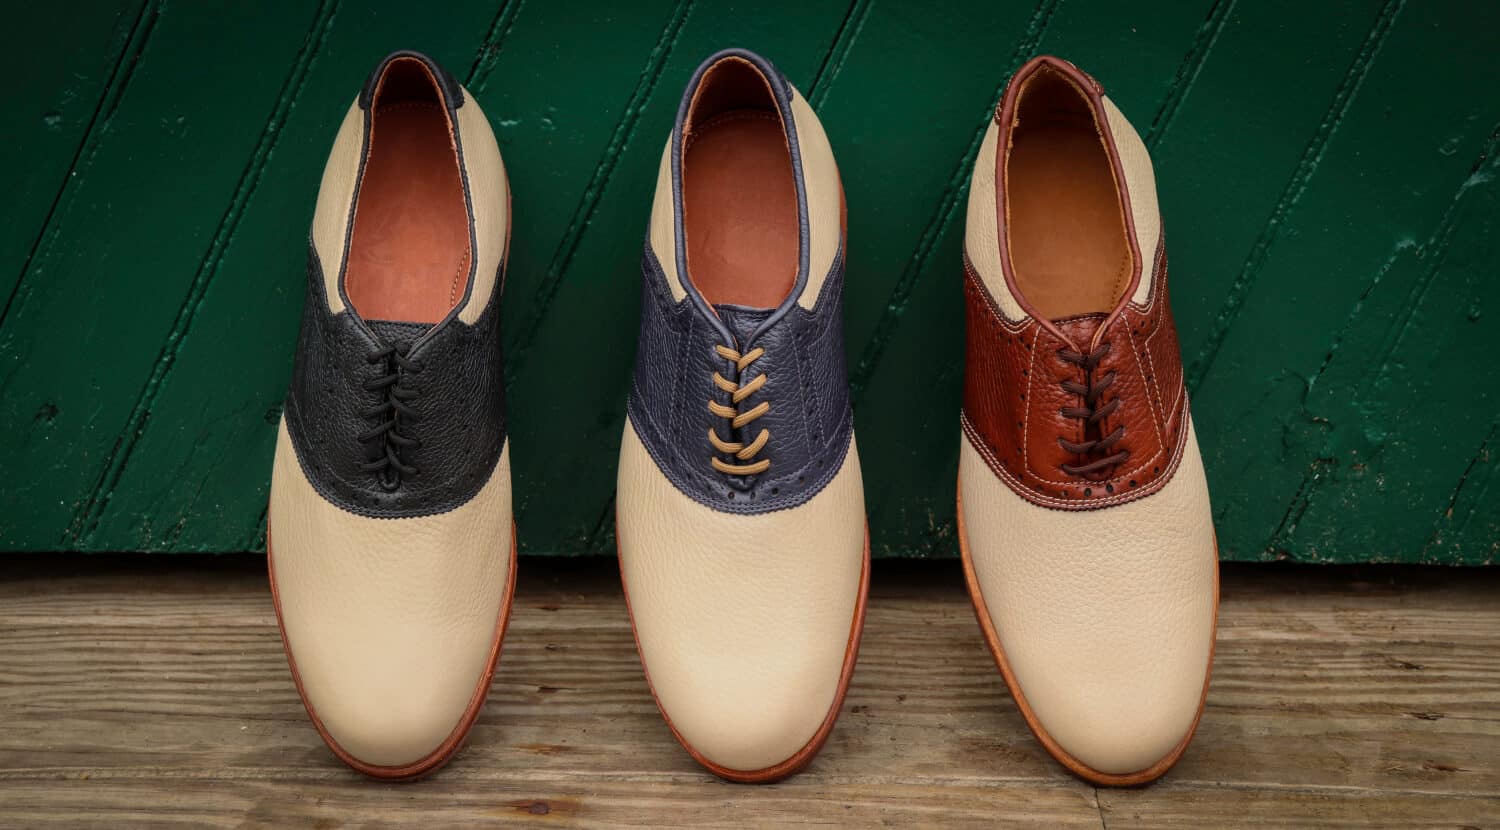 Men's saddle shoes against a wooden doorway outside, with a vintage rustic theme.